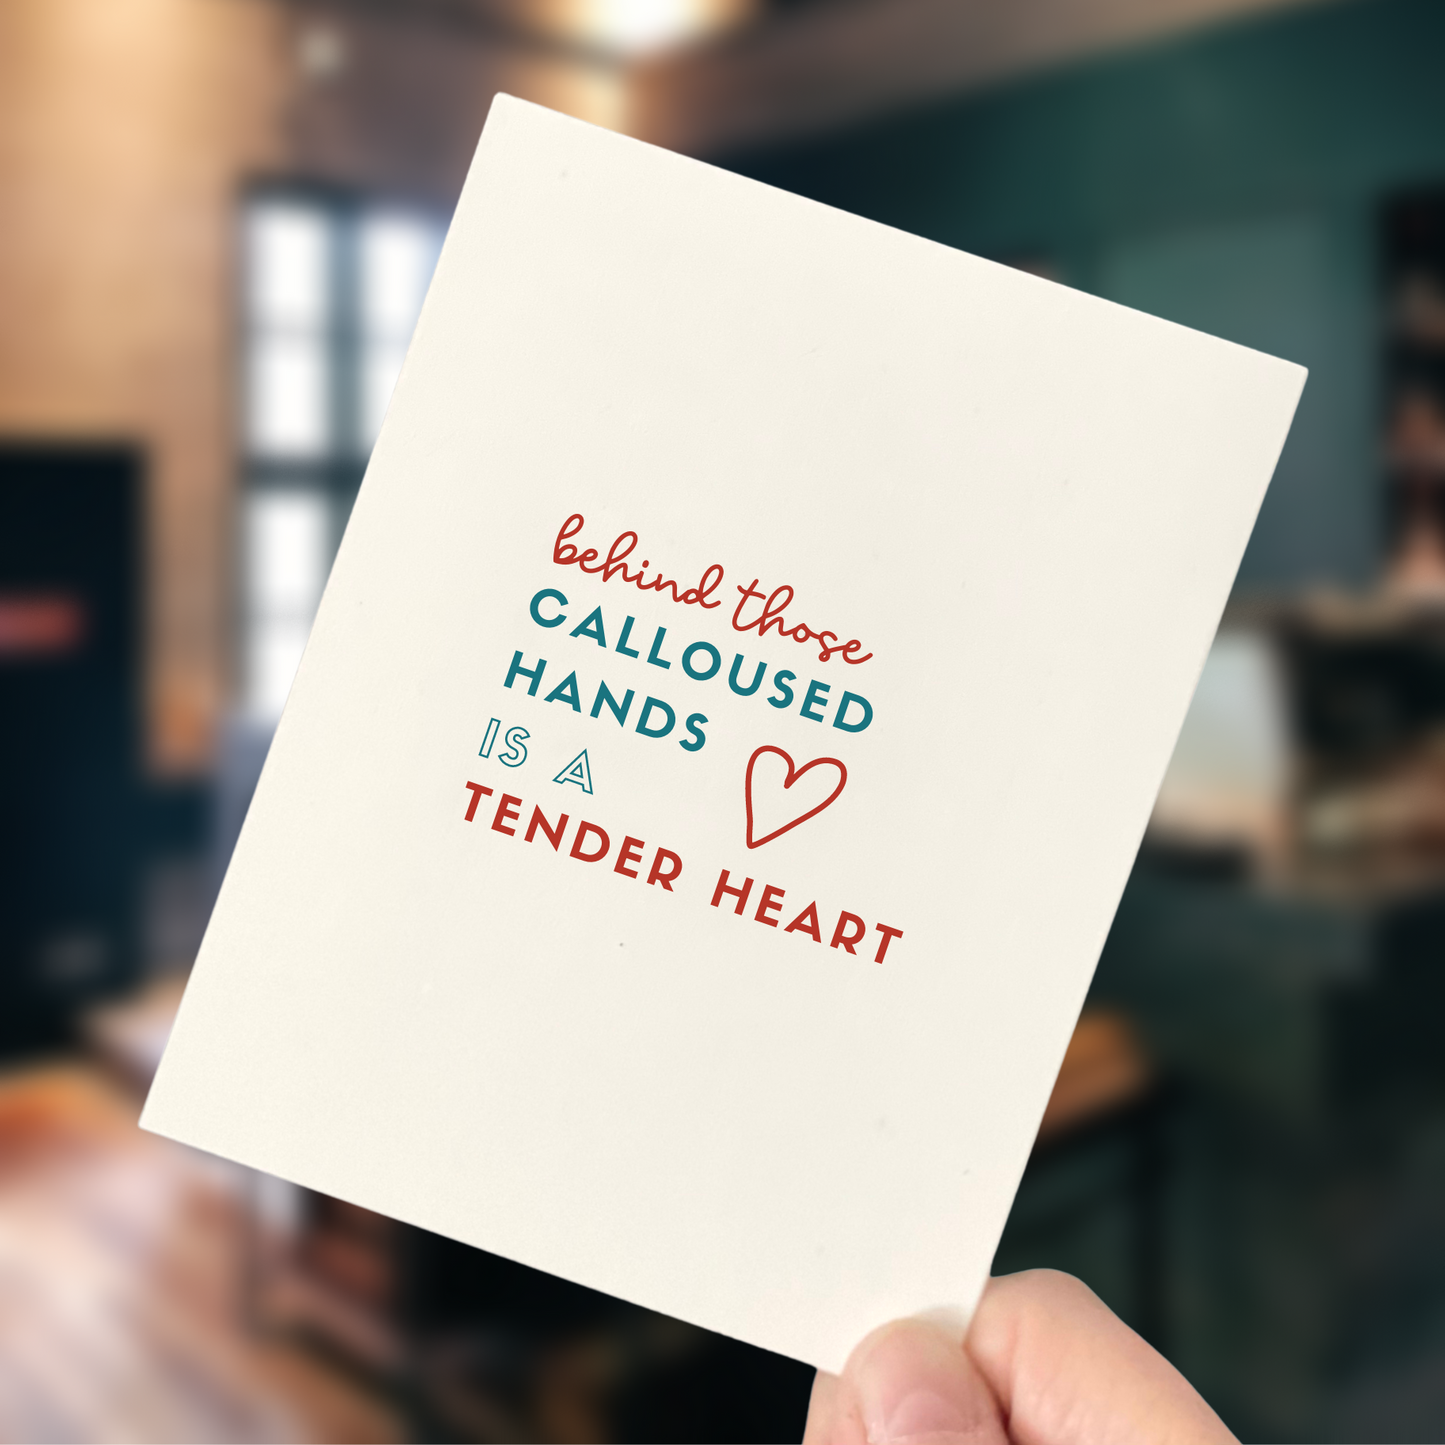 Calloused Hands and Tender Heart, Love & Friendship Card